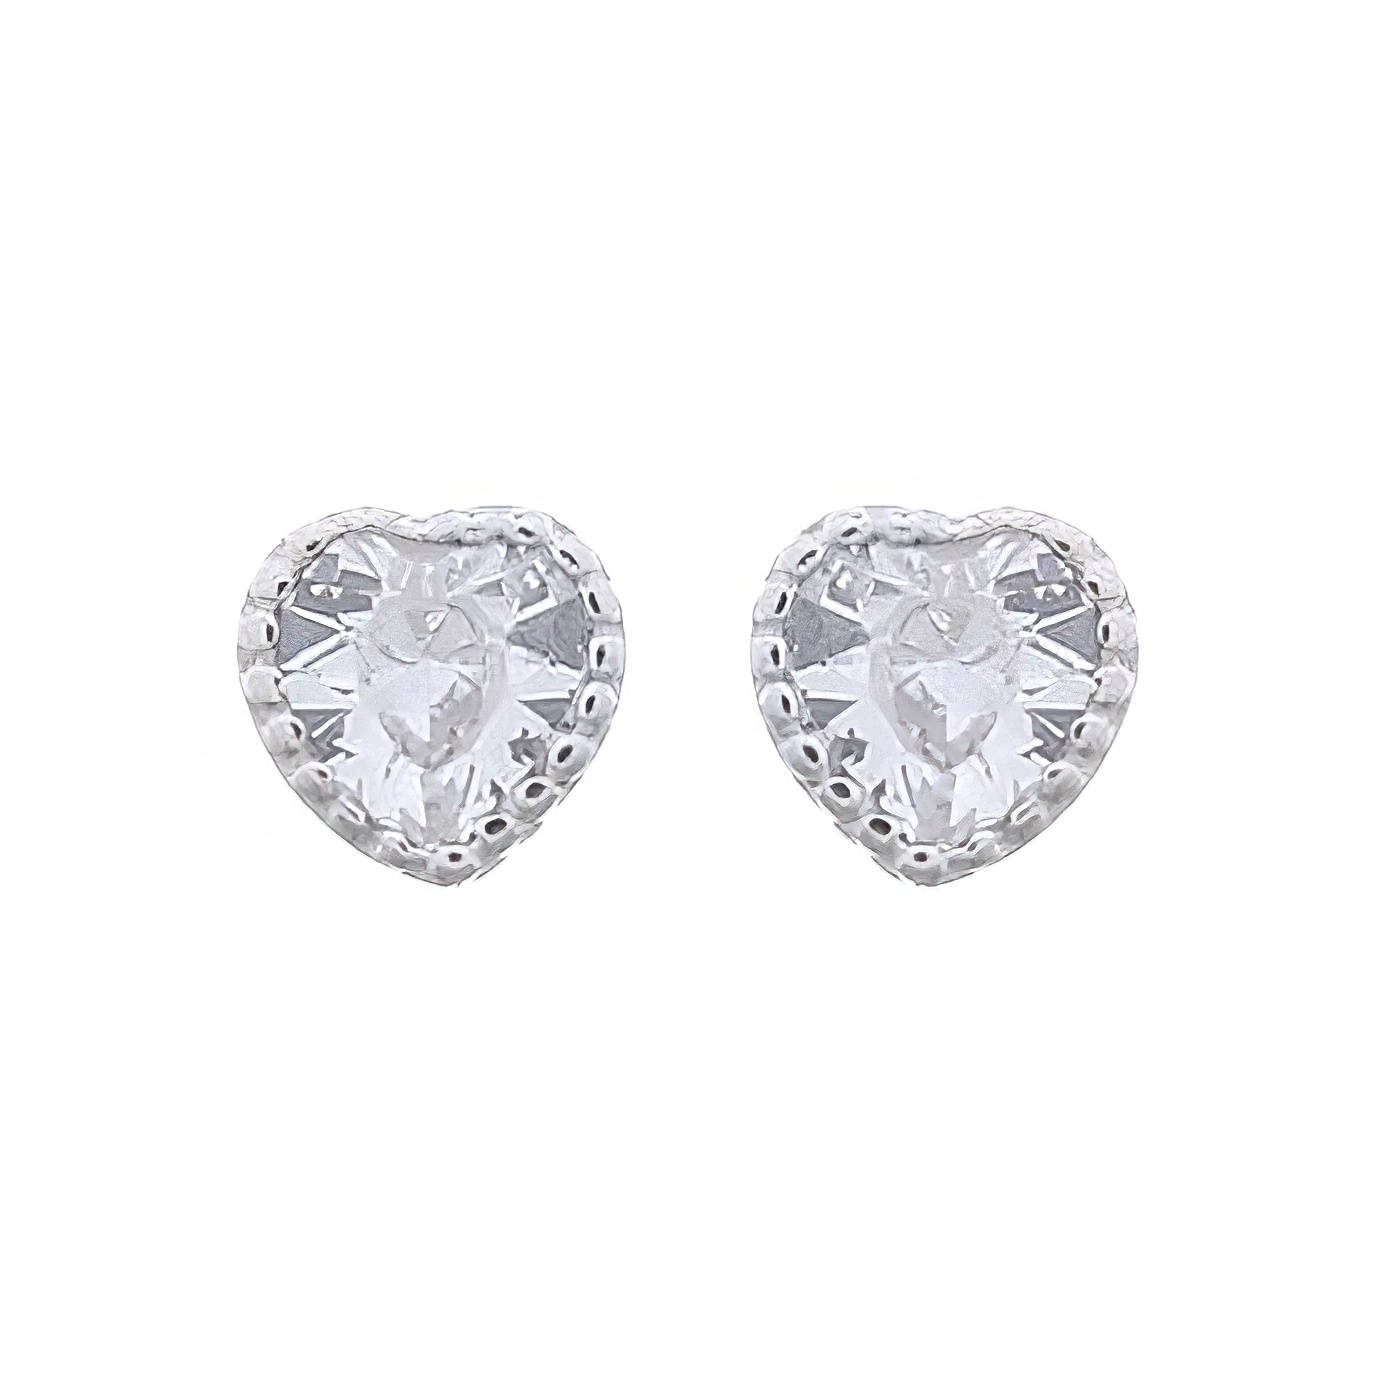 Tiny Delightful Heart With White CZ 925 Silver Stud Earrings 